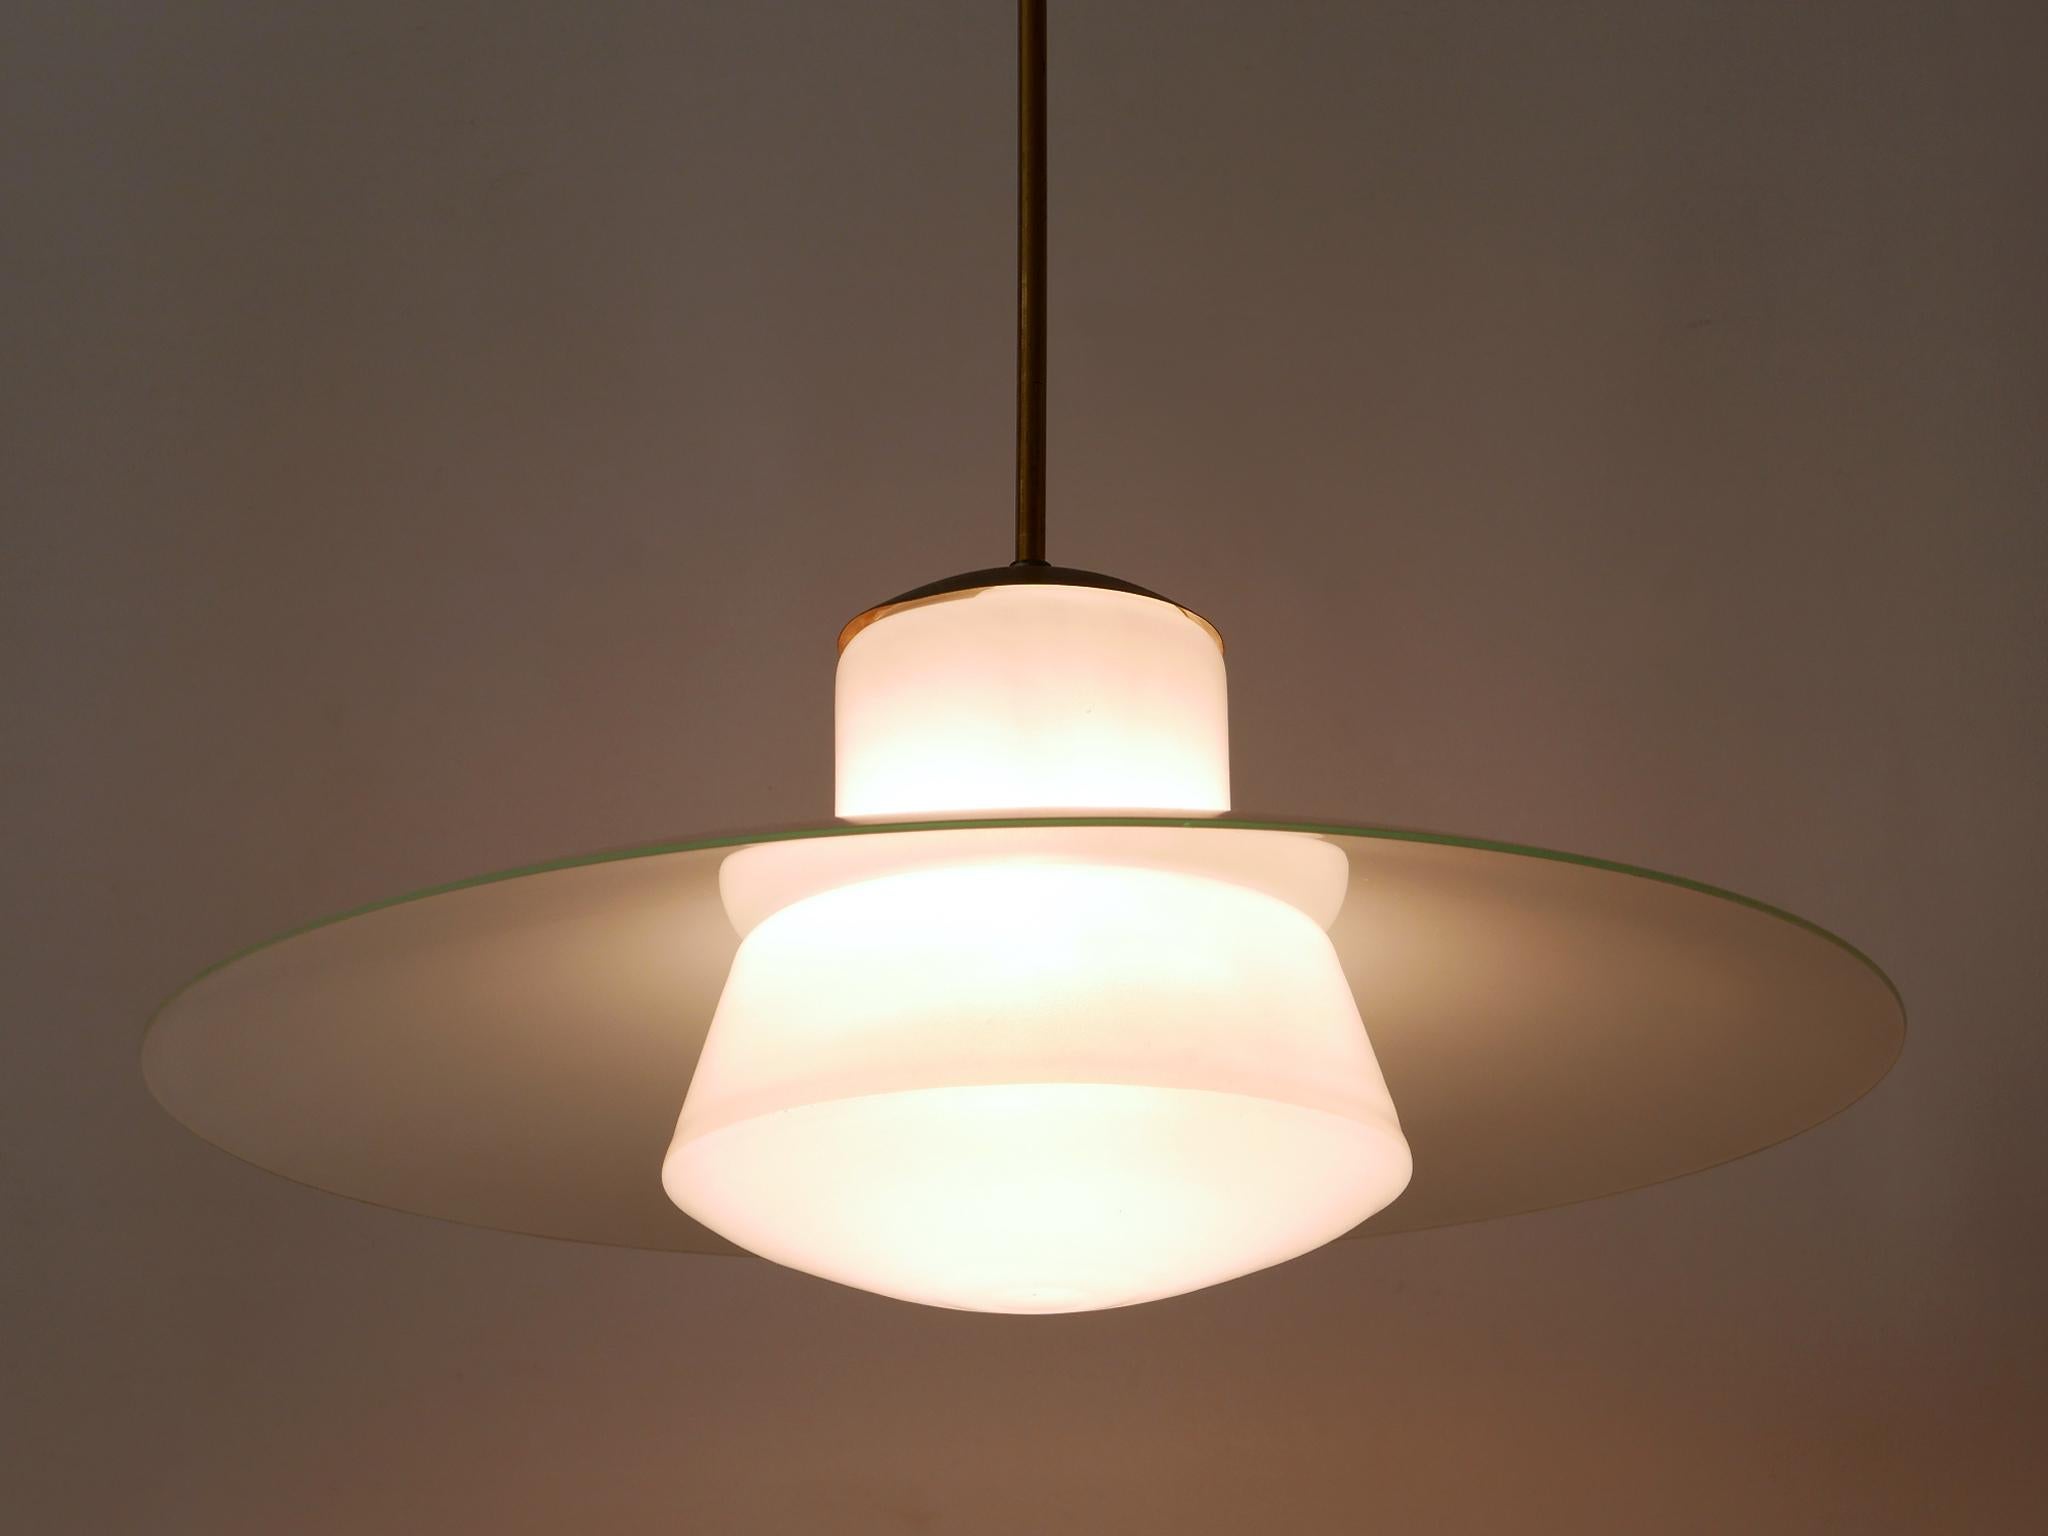 Brass Rare Mid-Century Modern Pendant Lamp by Wolfgang Tümpel for Doria Germany 1950s For Sale